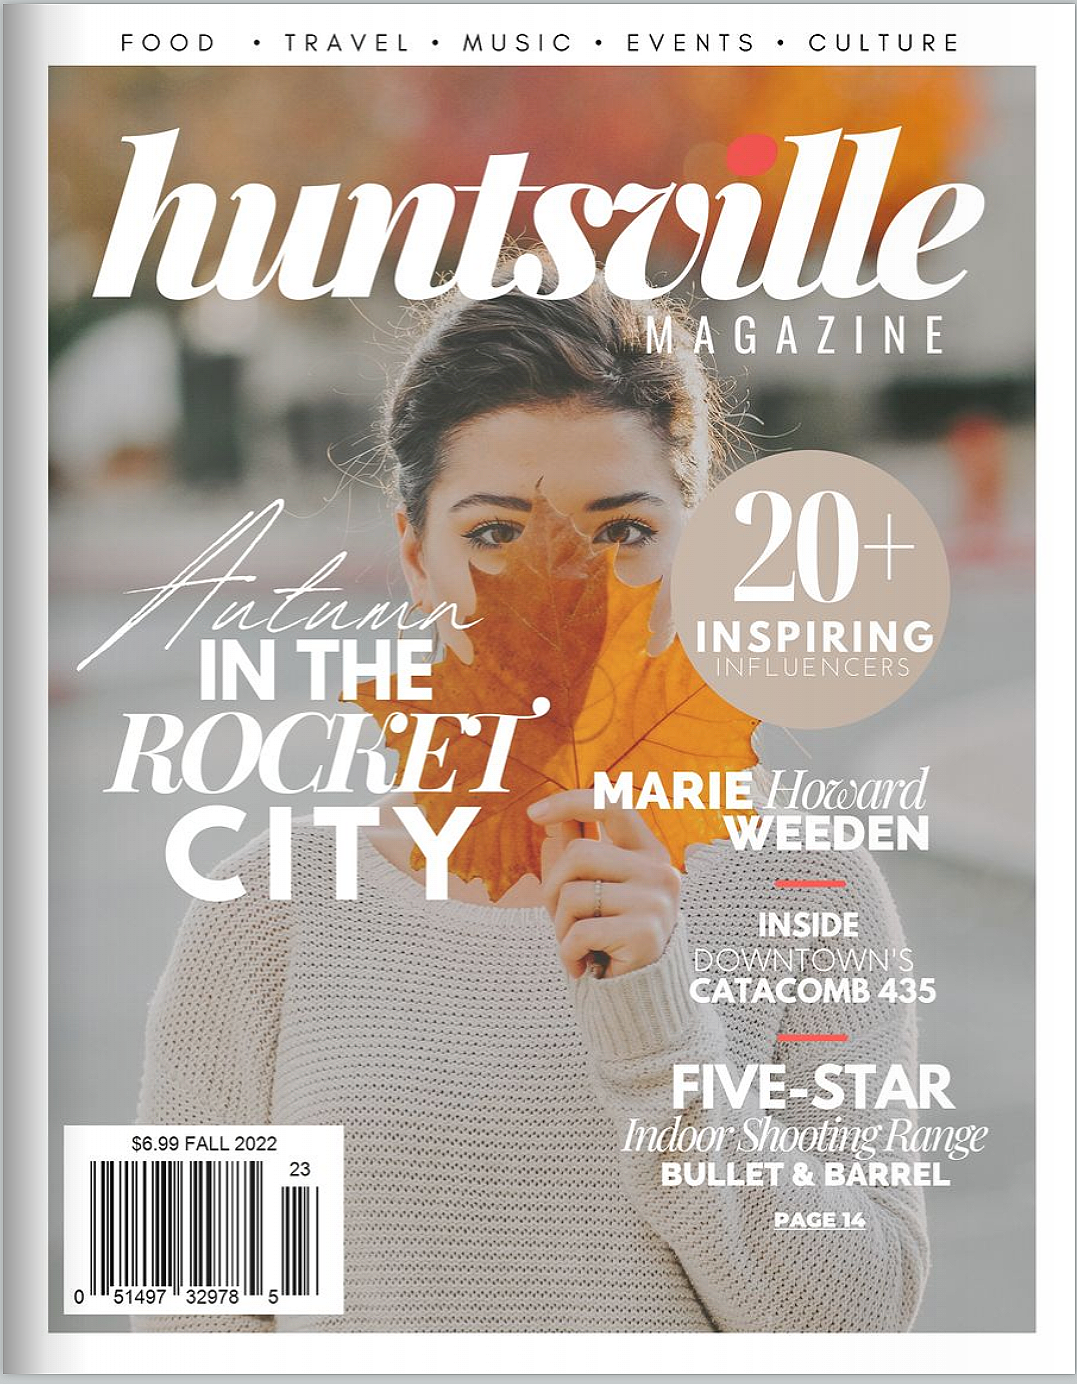 Huntsville-Magazine-Fall-2022-Issue-Cover.png